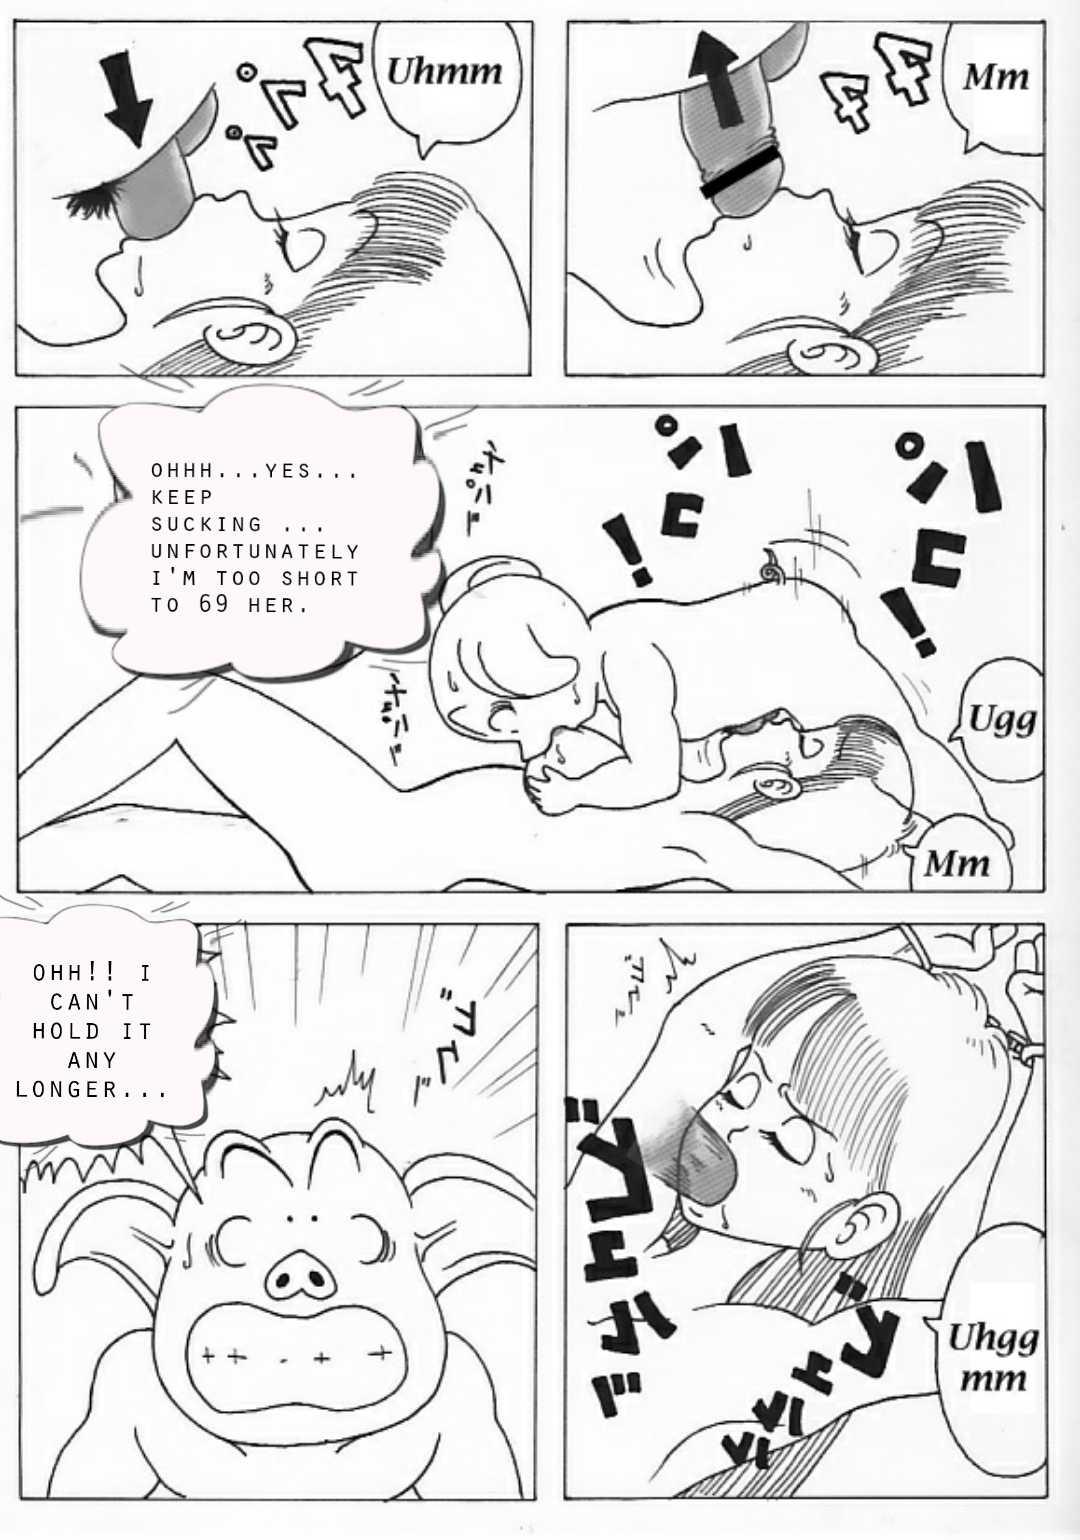 Pussy Fingering Bulma and Oolong - Dragon ball Interview - Page 3